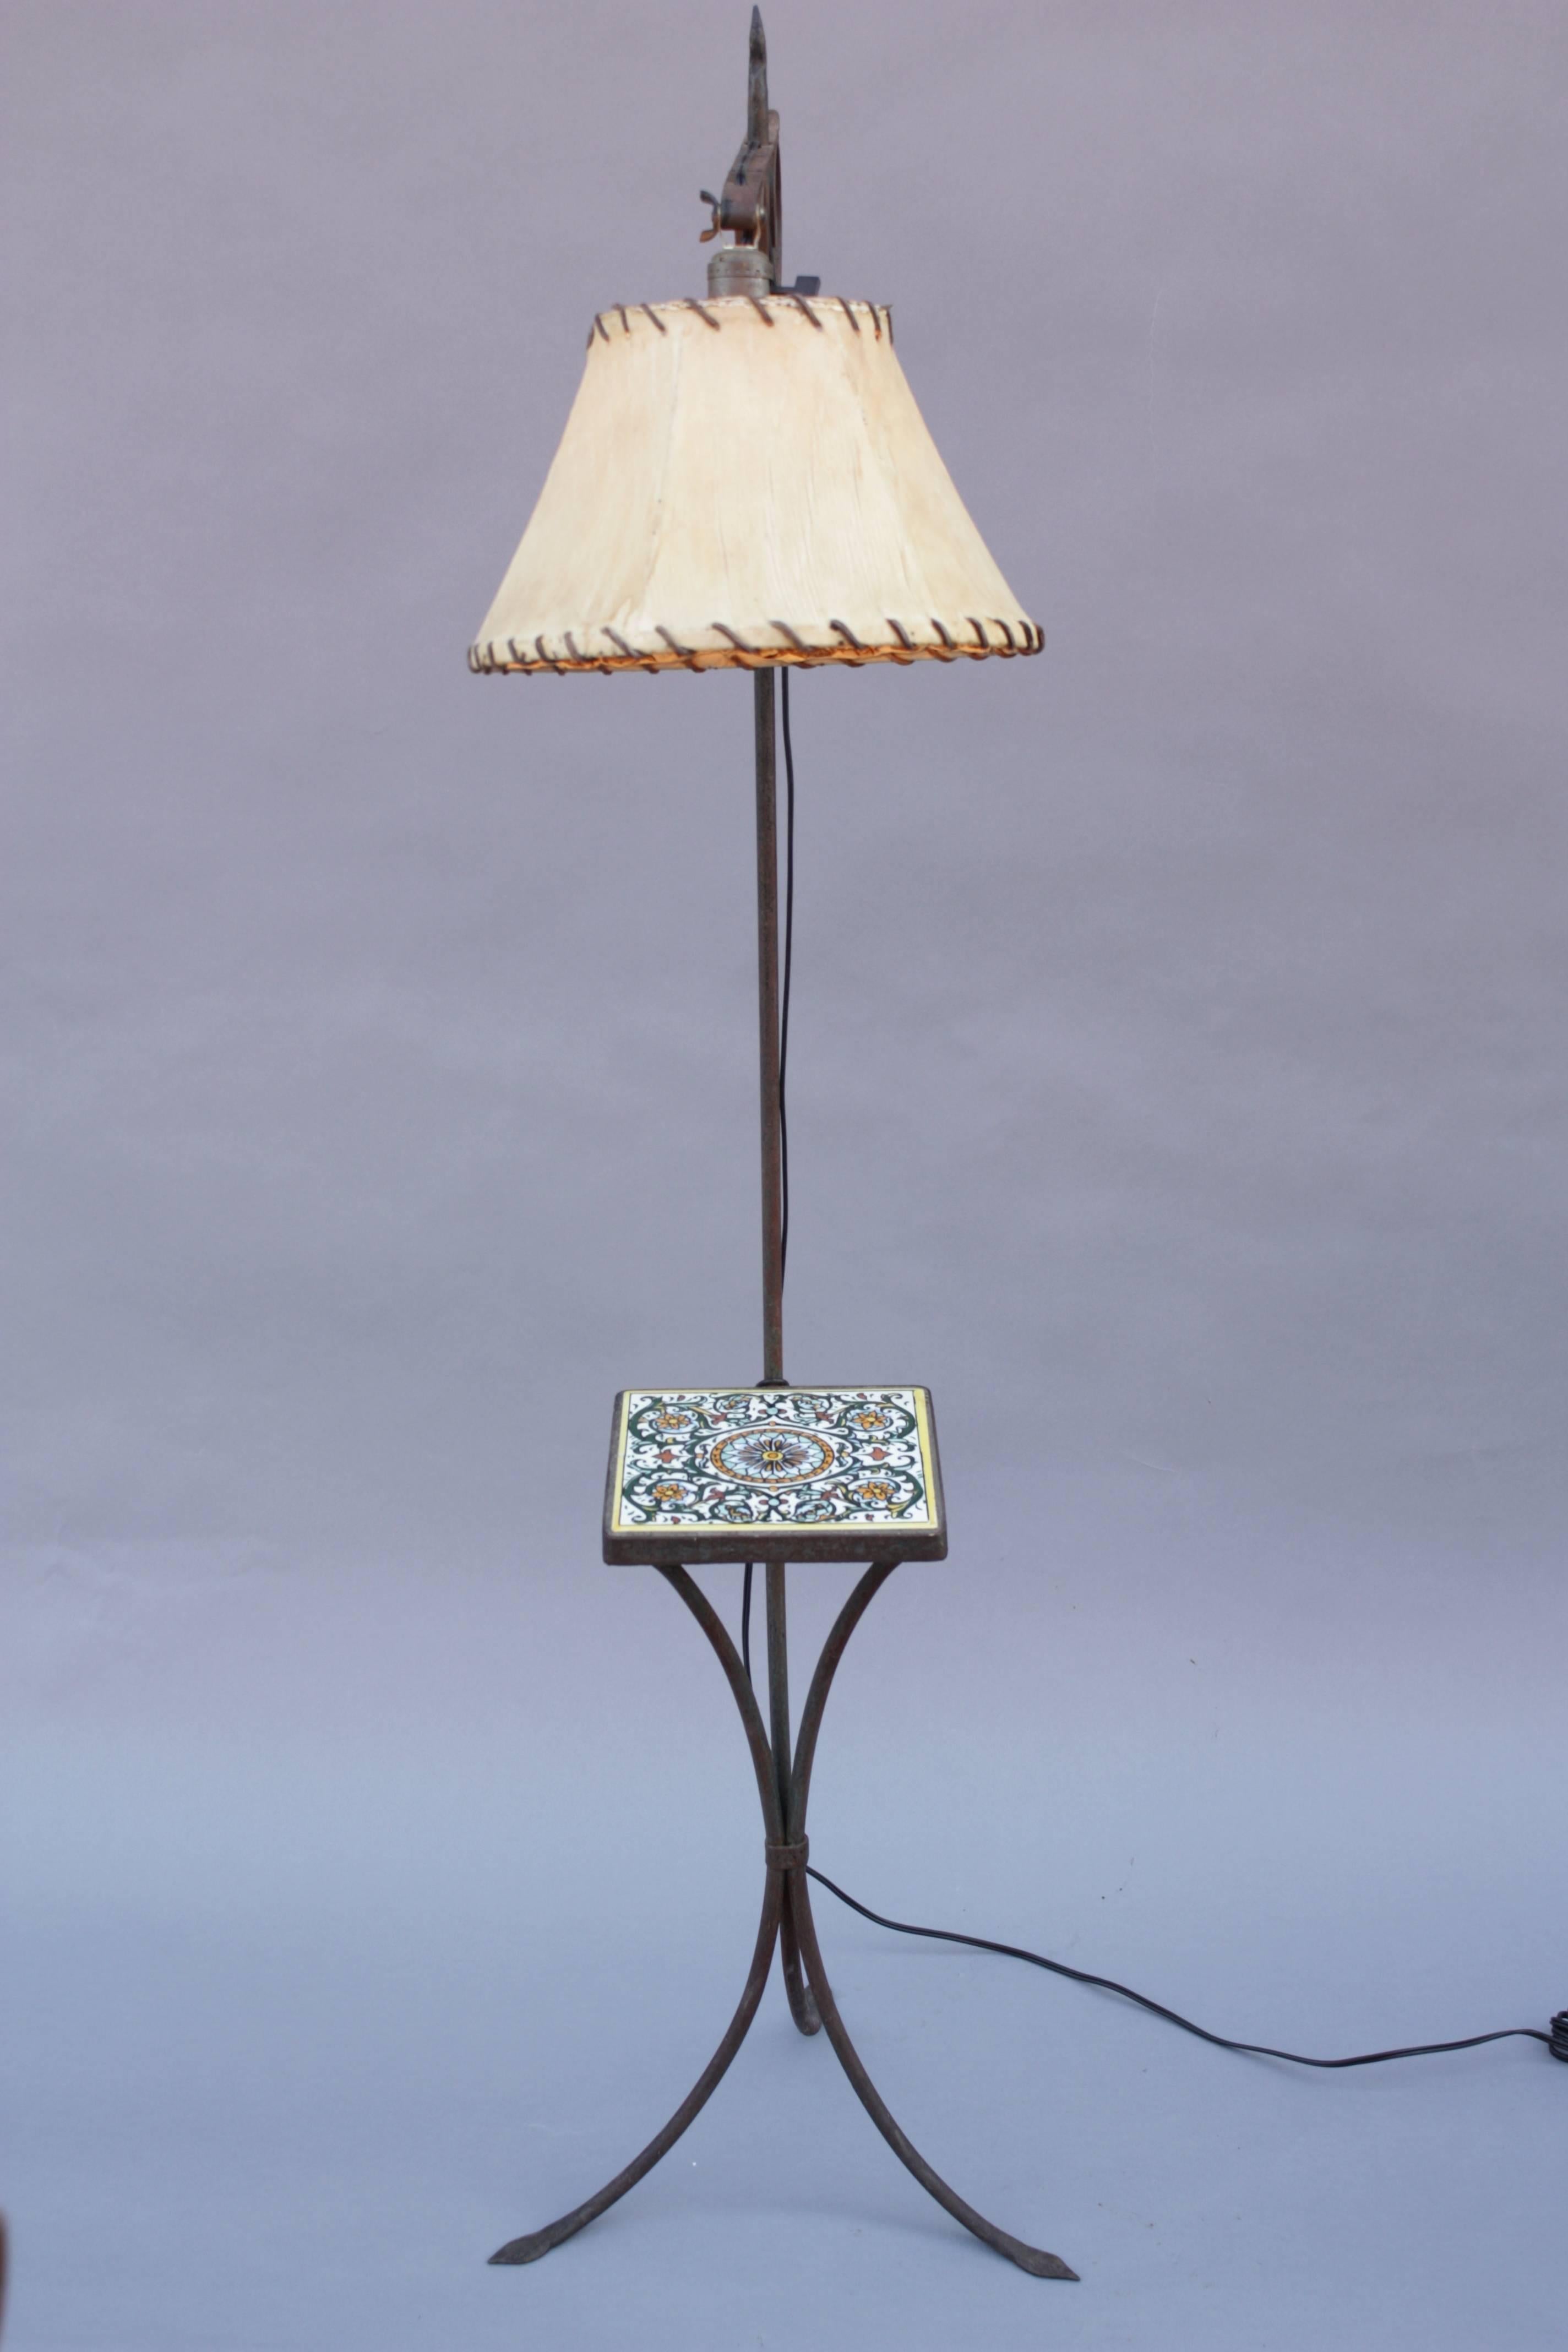 Great wrought iron floor lamp with vintage tile drink table. Rawhide shade. The height is adjustable.